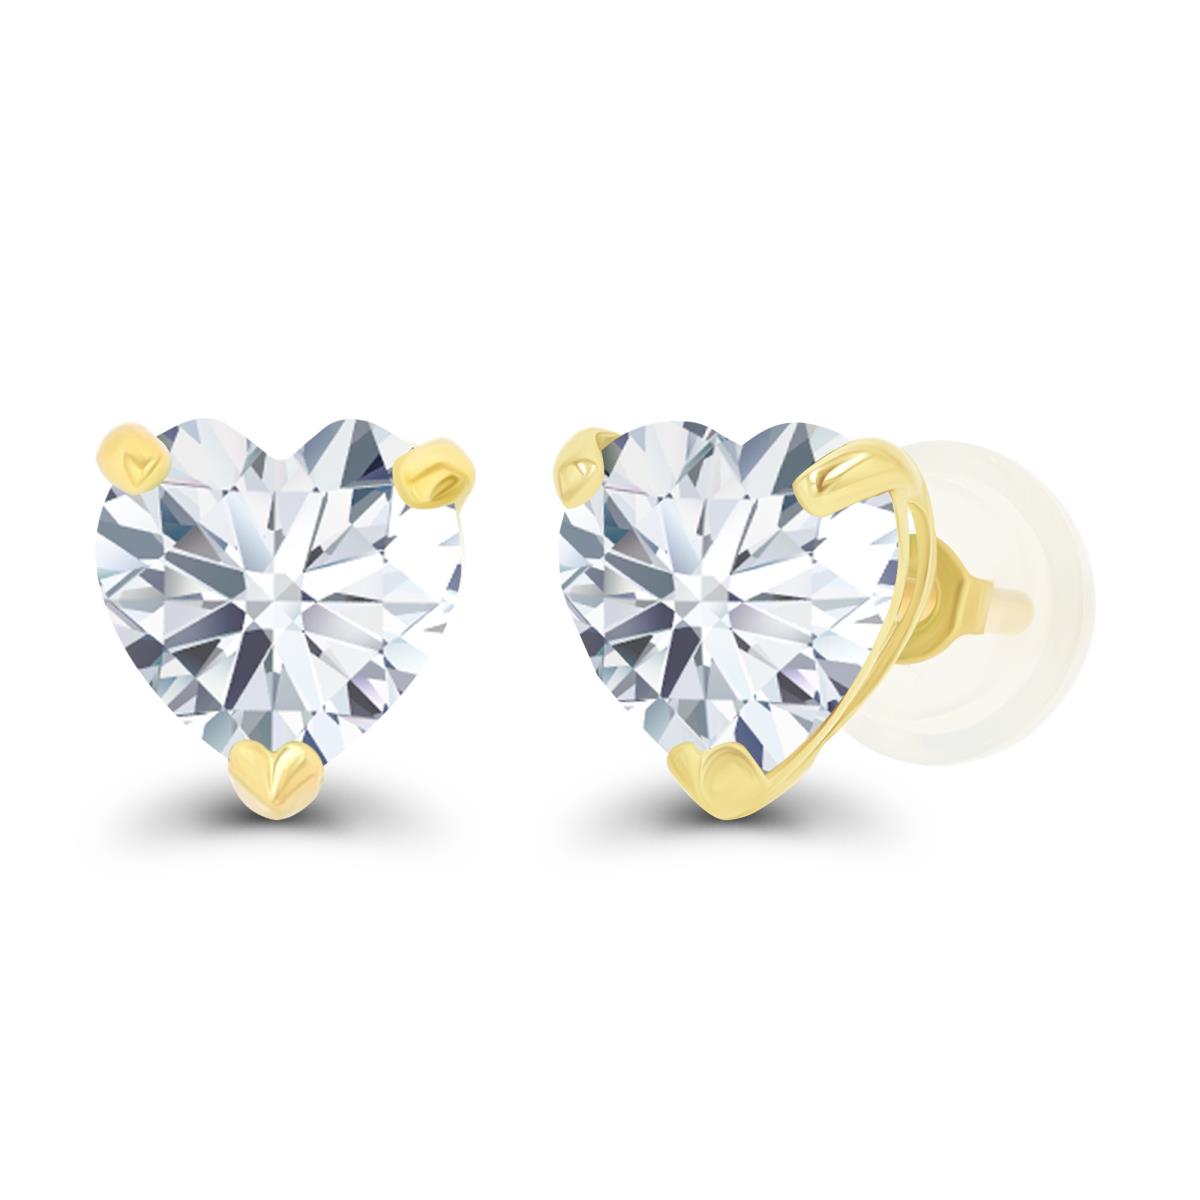 10K Yellow Gold 6mm Heart Created White Sapphire Stud Earring with Silicone Back